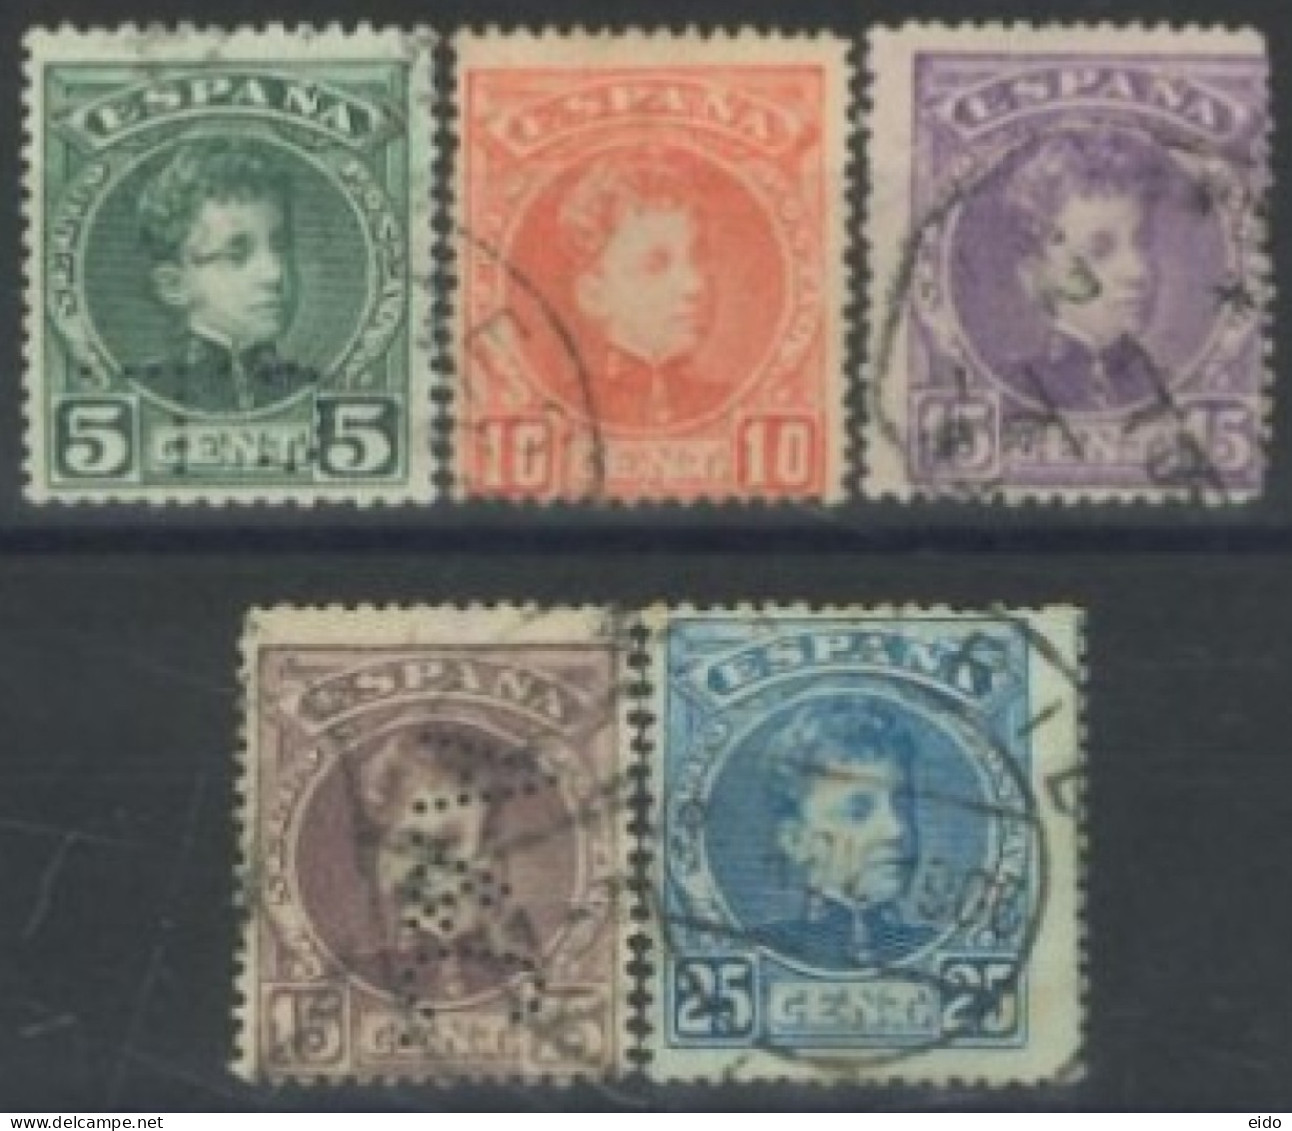 SPAIN, 1900/05, KING ALFONSO STAMPS SET OF 5, USED. - Usati